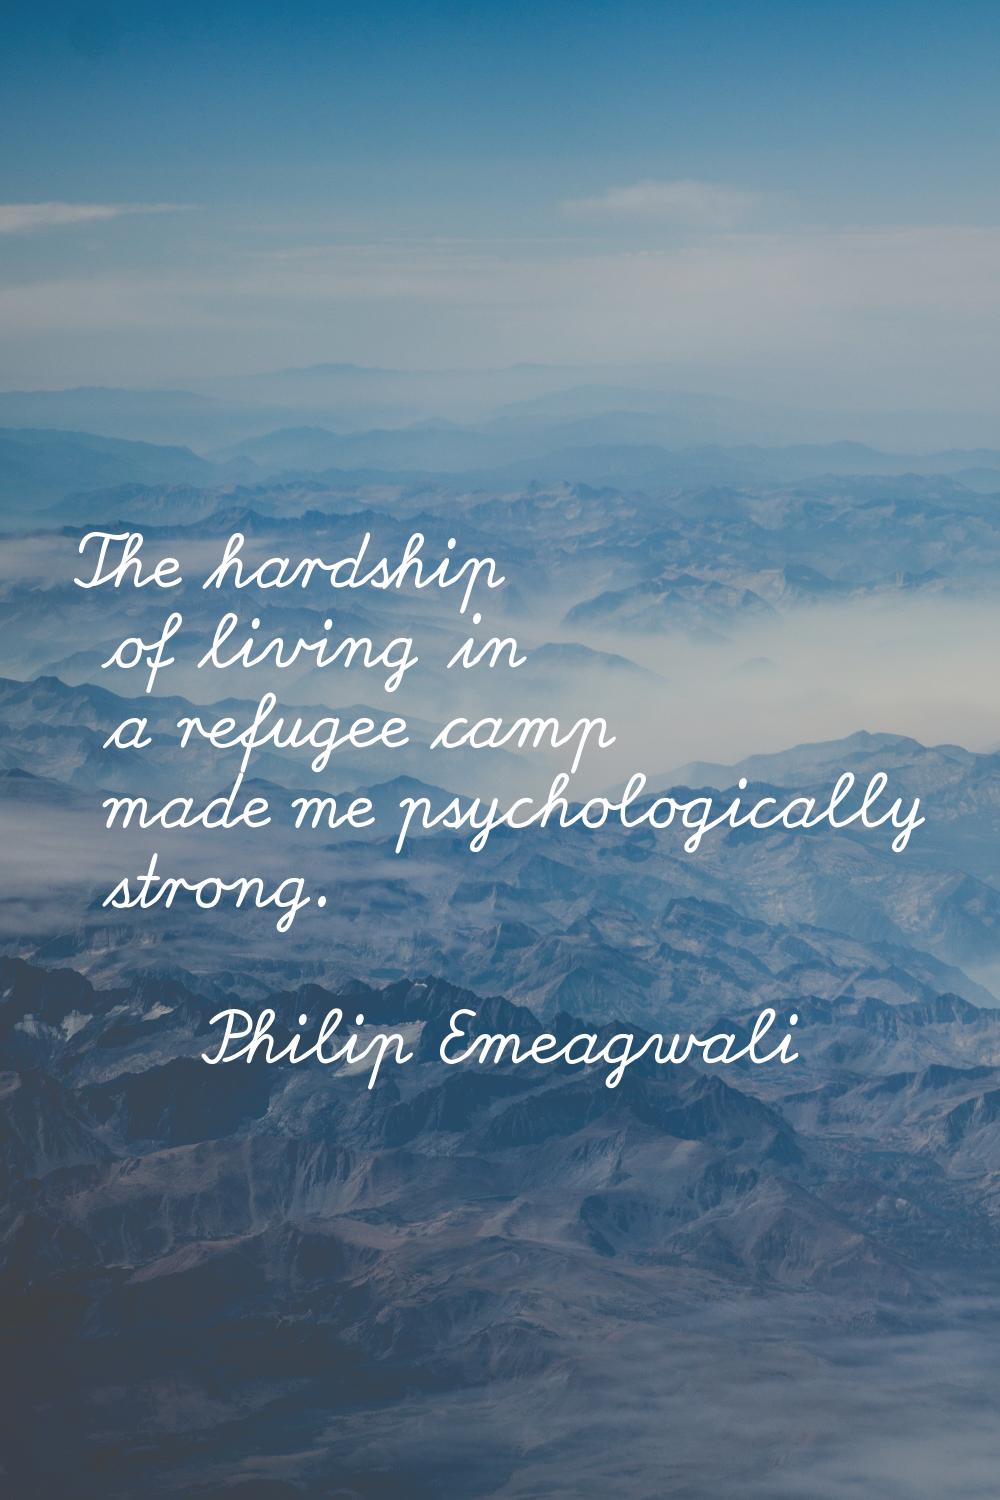 The hardship of living in a refugee camp made me psychologically strong.